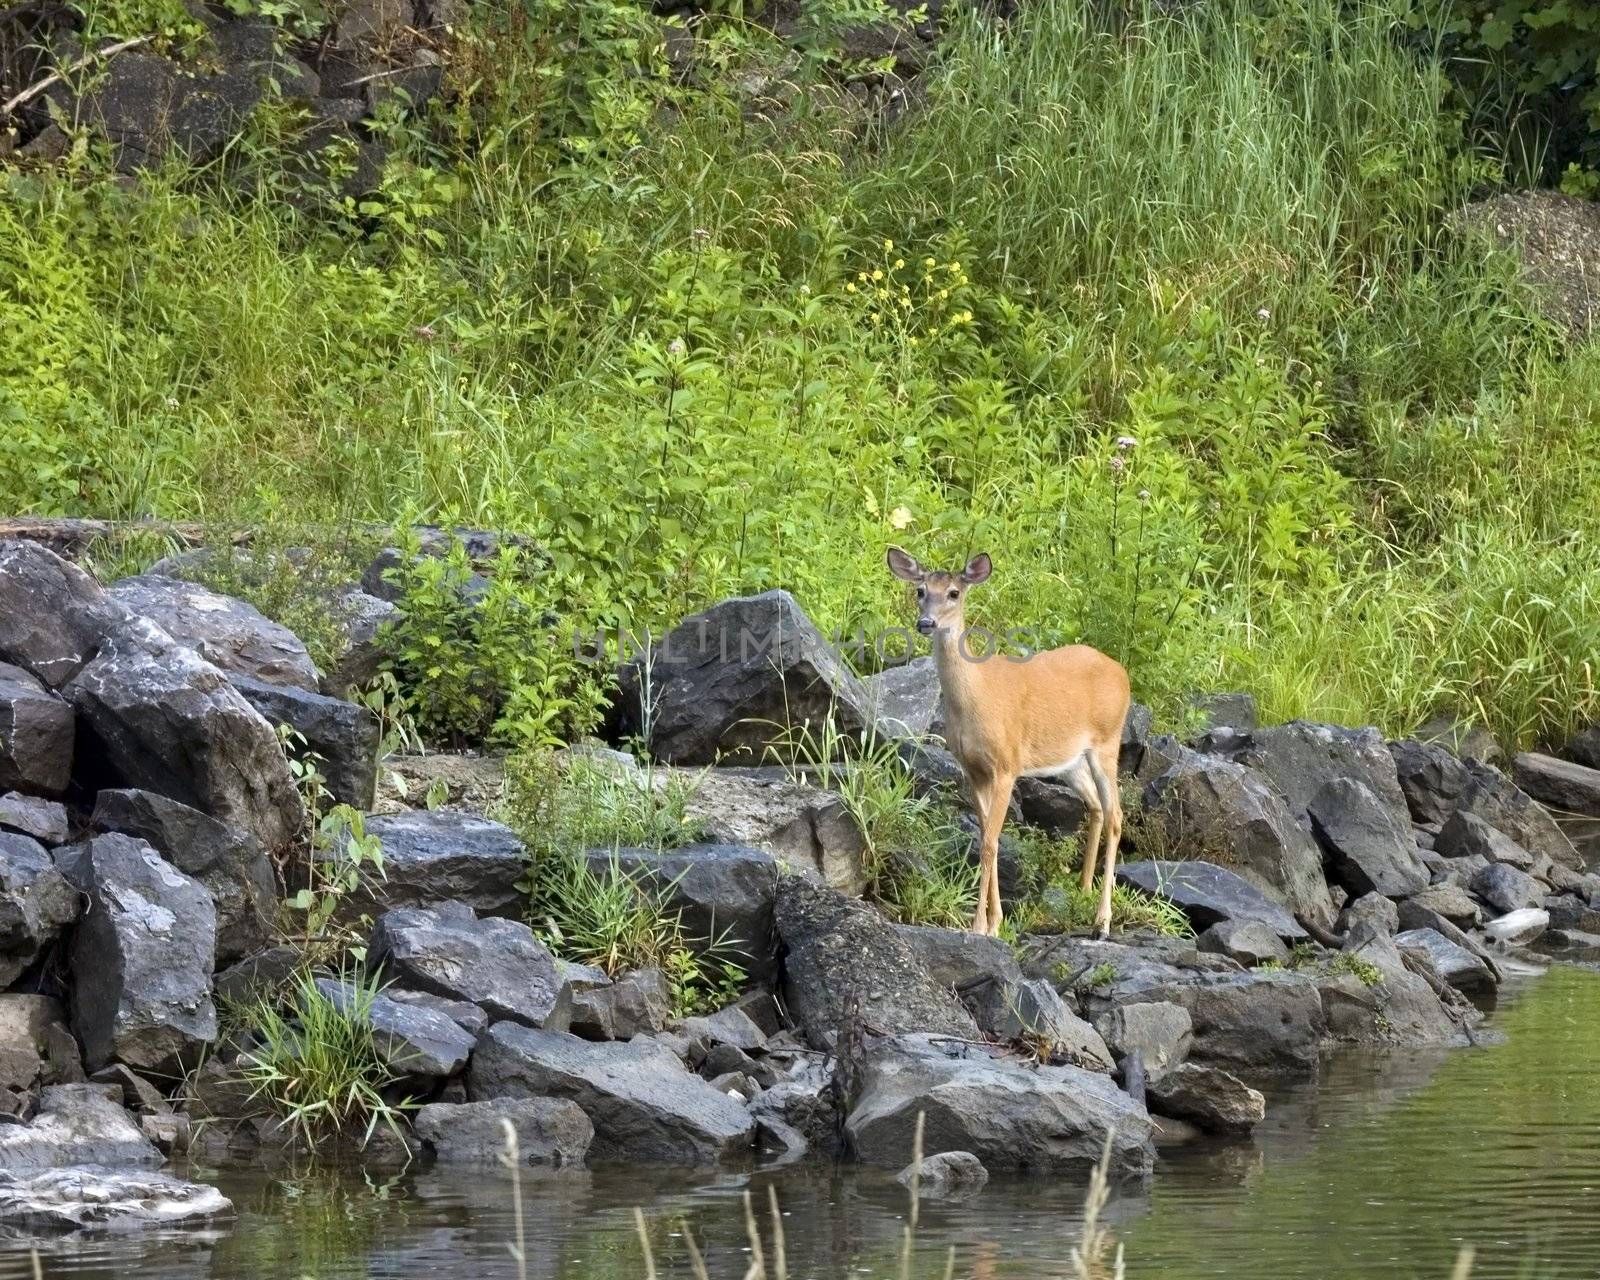 A Whitetail deer doe standing next to a stream.